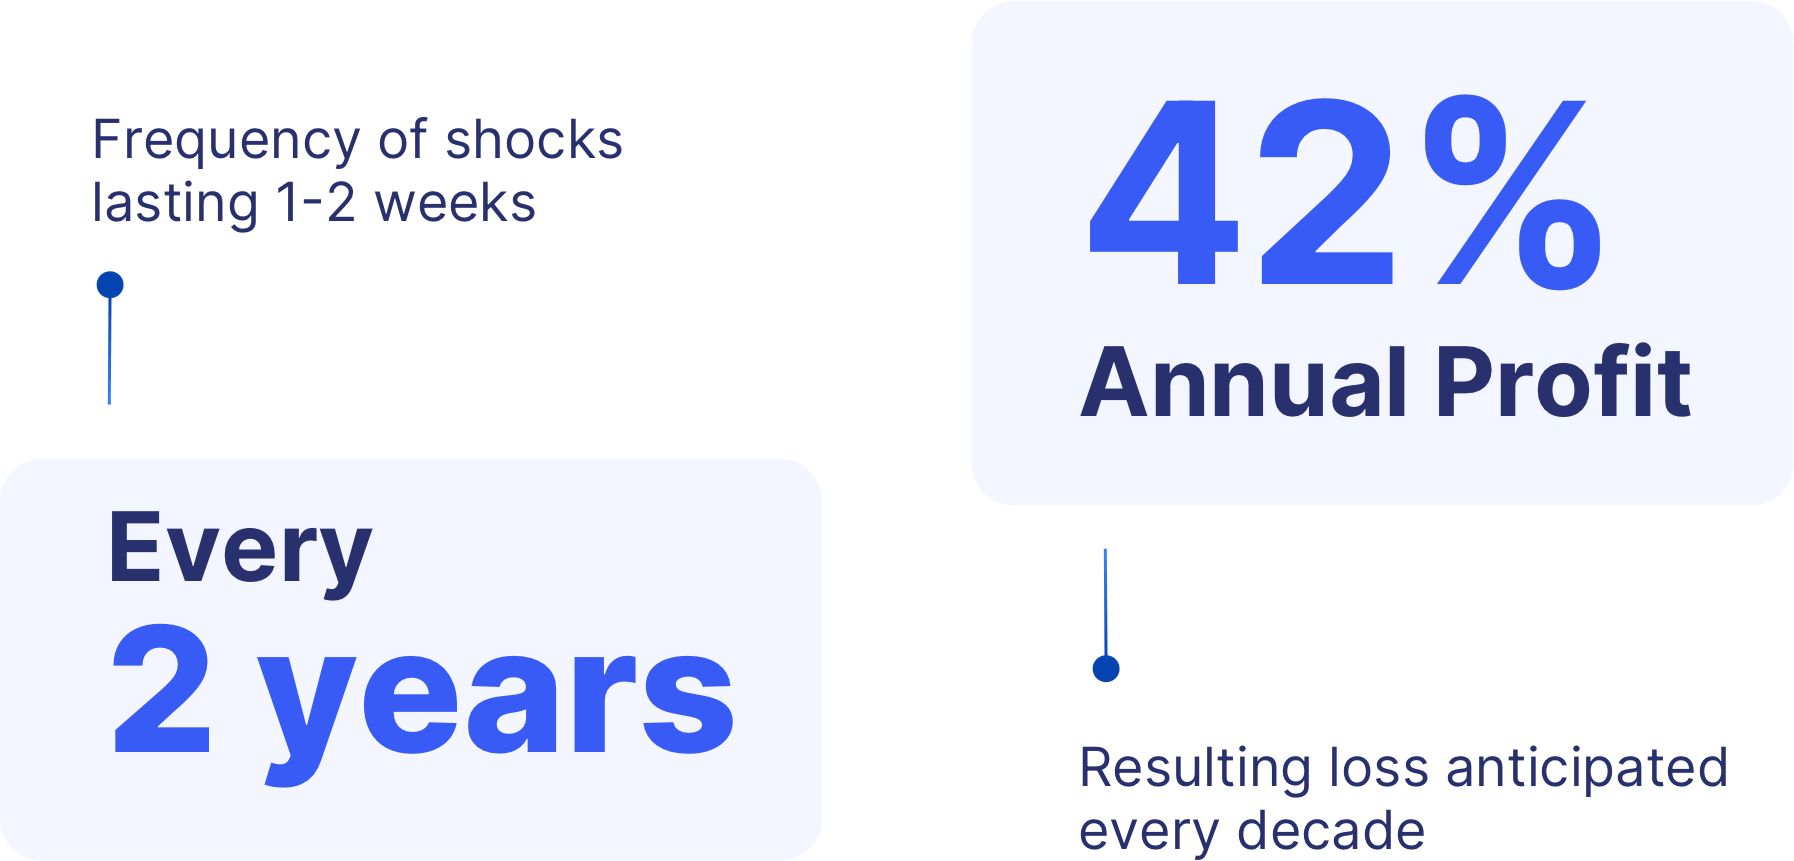 Infographic stating frequency of shocks lasting 1-2 weeks every 2 years results in a 42% annual profit loss anticipated every decade